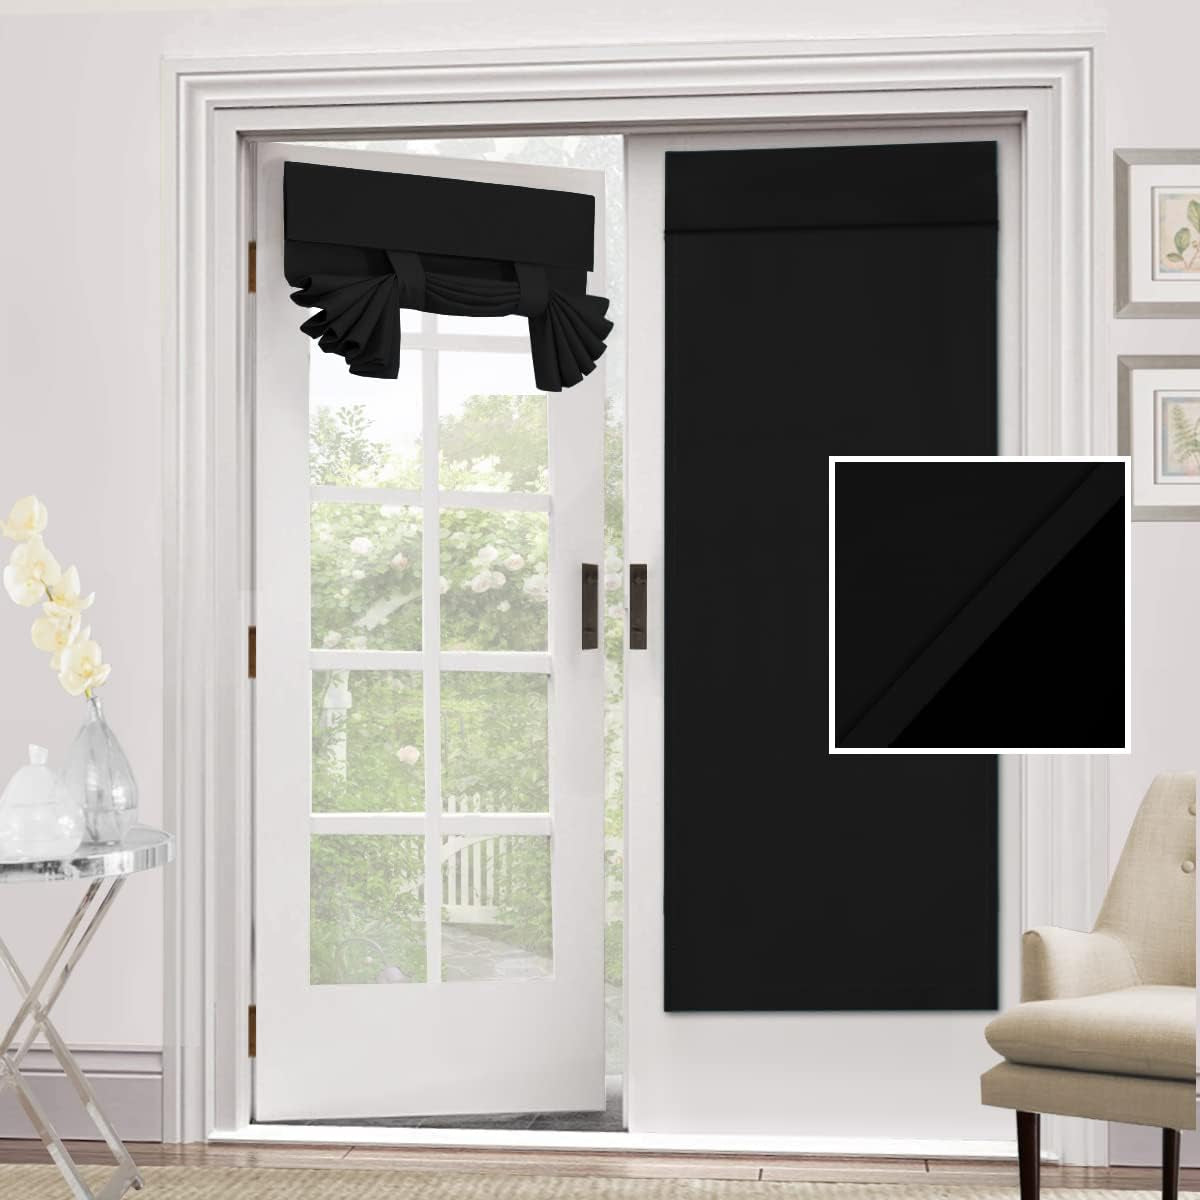 H.VERSAILTEX 100% Blackout Door Curtain - Small French Door Curtains for Doors Window, Thermal Insulated Adhesive Tricia Door Curtain, 26X40 Inches, 1 Panel, Pumice Stone  H.VERSAILTEX Jet Black 26"W X 68"L 